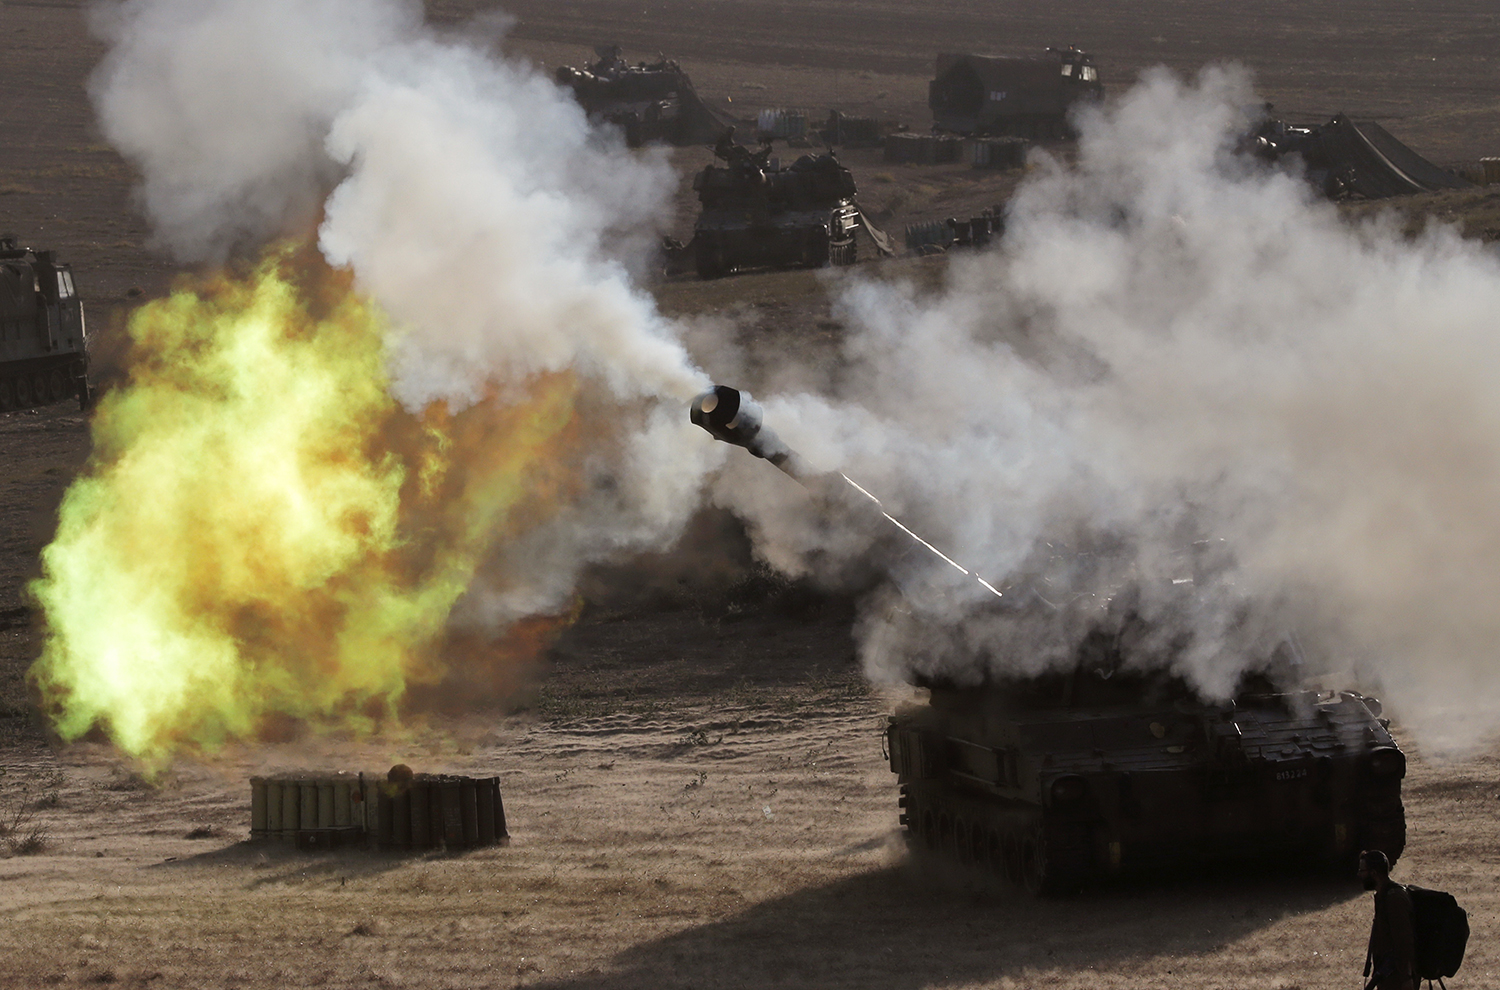 An Israeli tank, positioned near the Israeli border with the Gaza Strip, fires a 155mm projectile towards targets in the Palestinian enclave on July 14, 2014. Photo: Getty Images